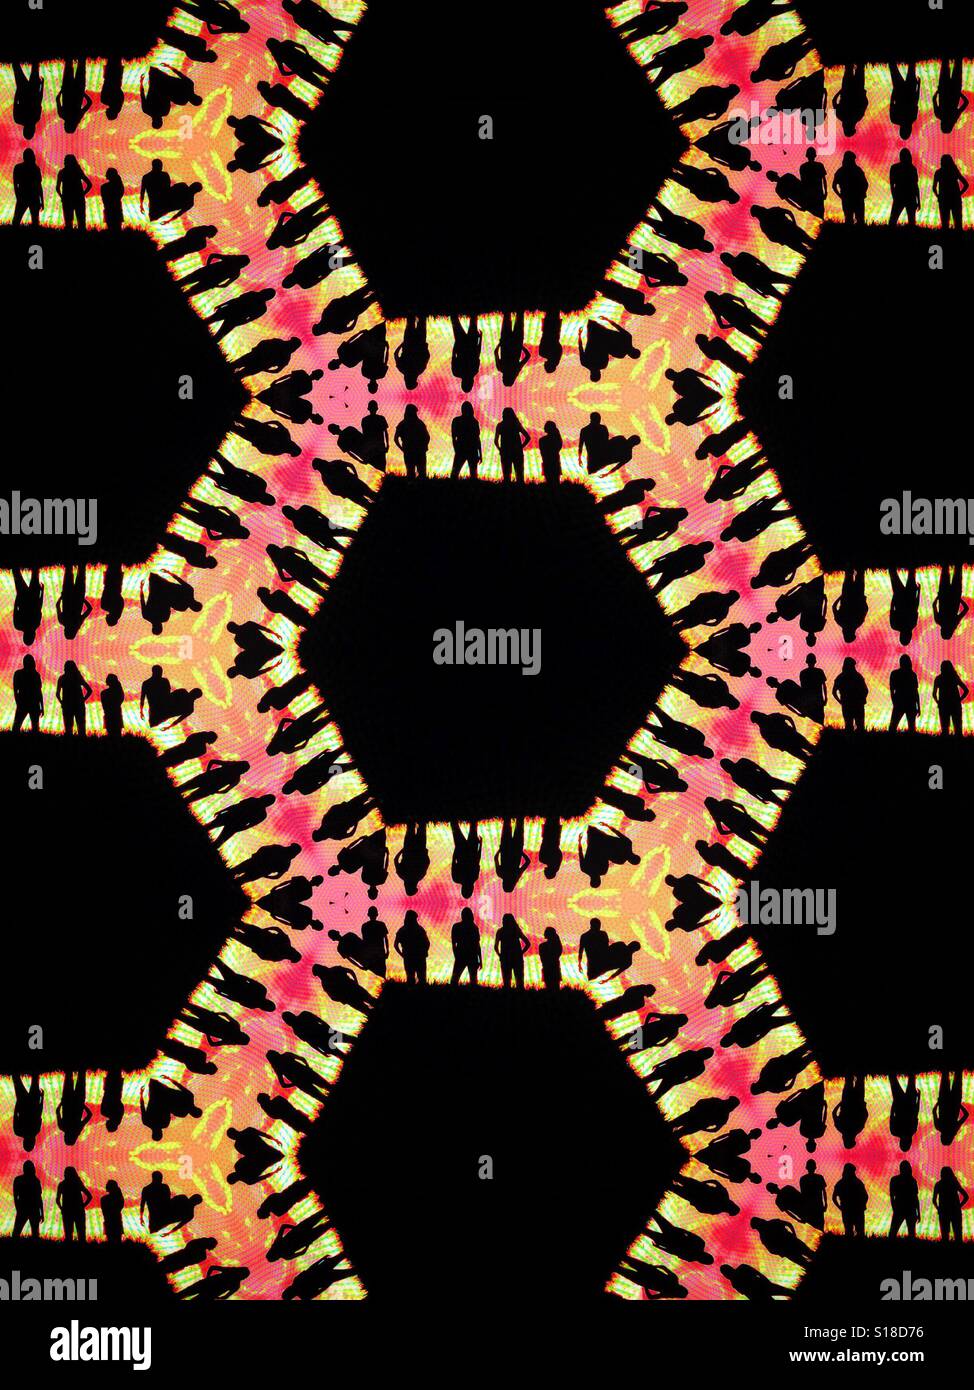 A pattern featuring the silhouetted of many people standing next to each other, against a bright pink background Stock Photo